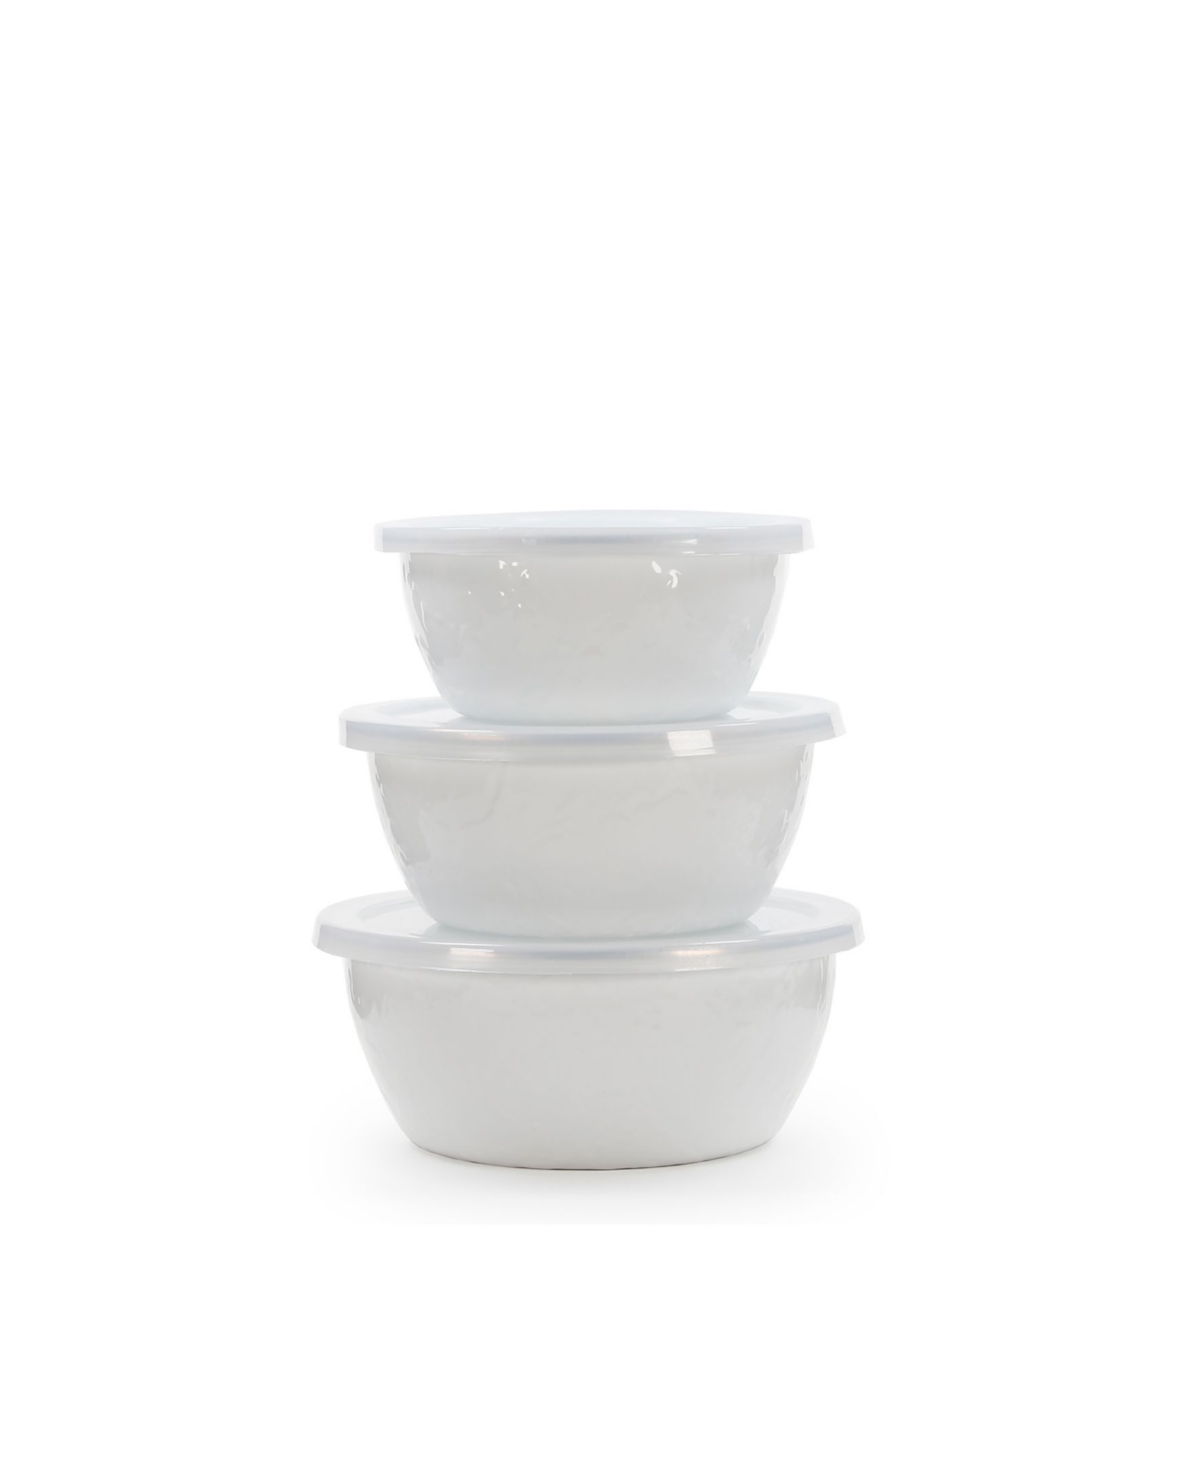 Solid White Enamelware Collection Nesting Bowls, Set of 3 - White